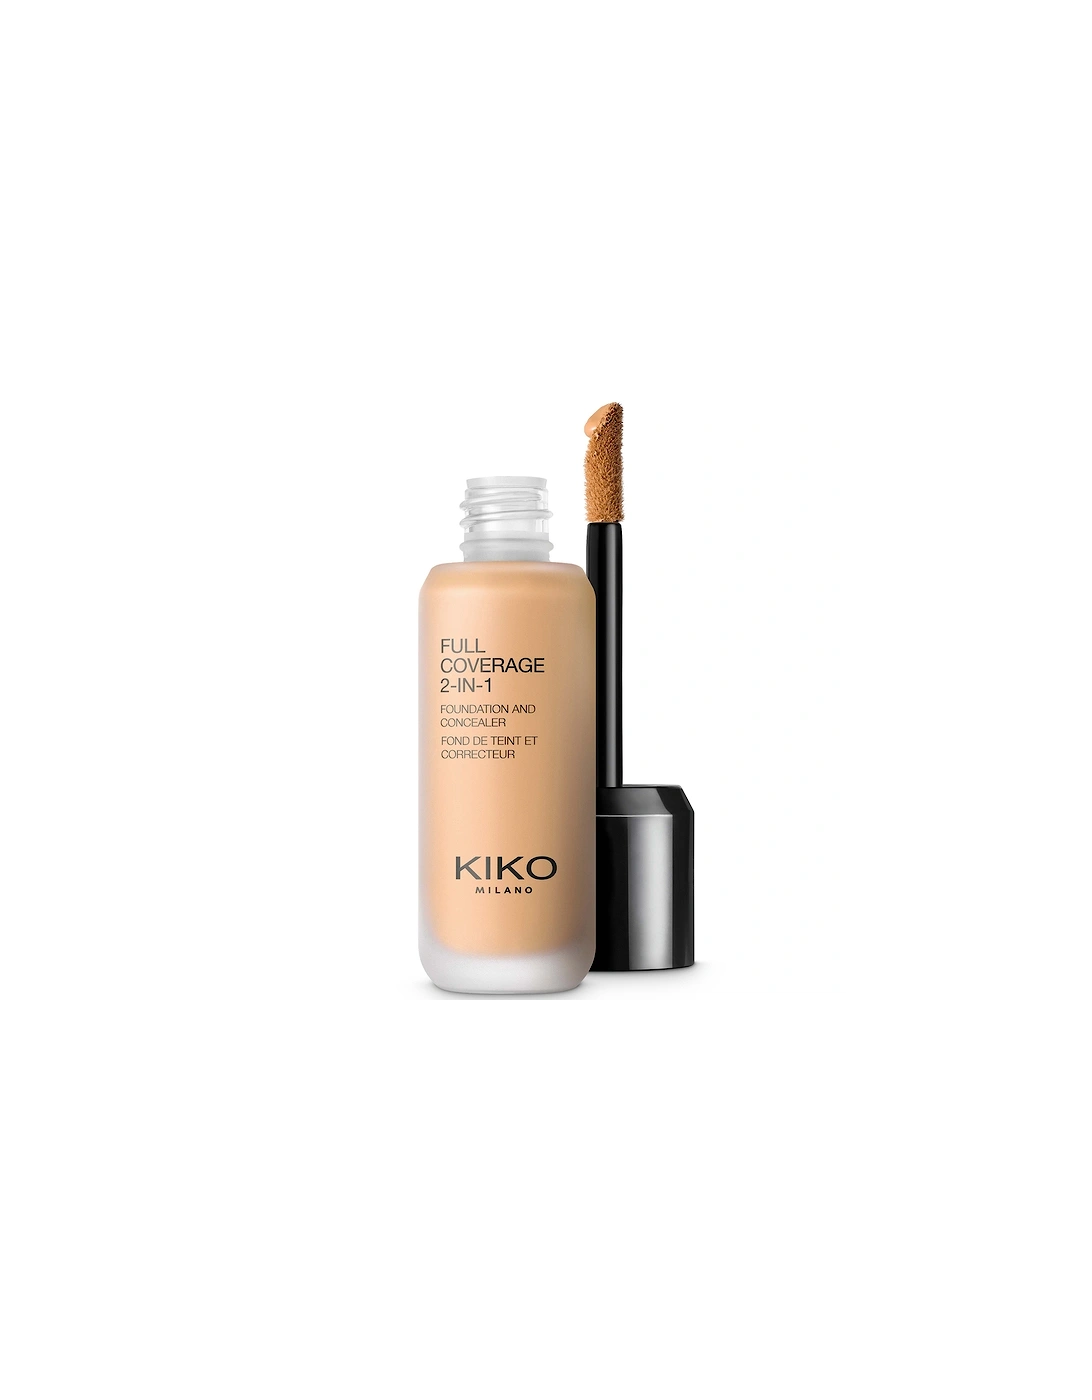 Full Coverage 2-in-1 Foundation and Concealer 25ml - 95 Neutral Gold, 2 of 1